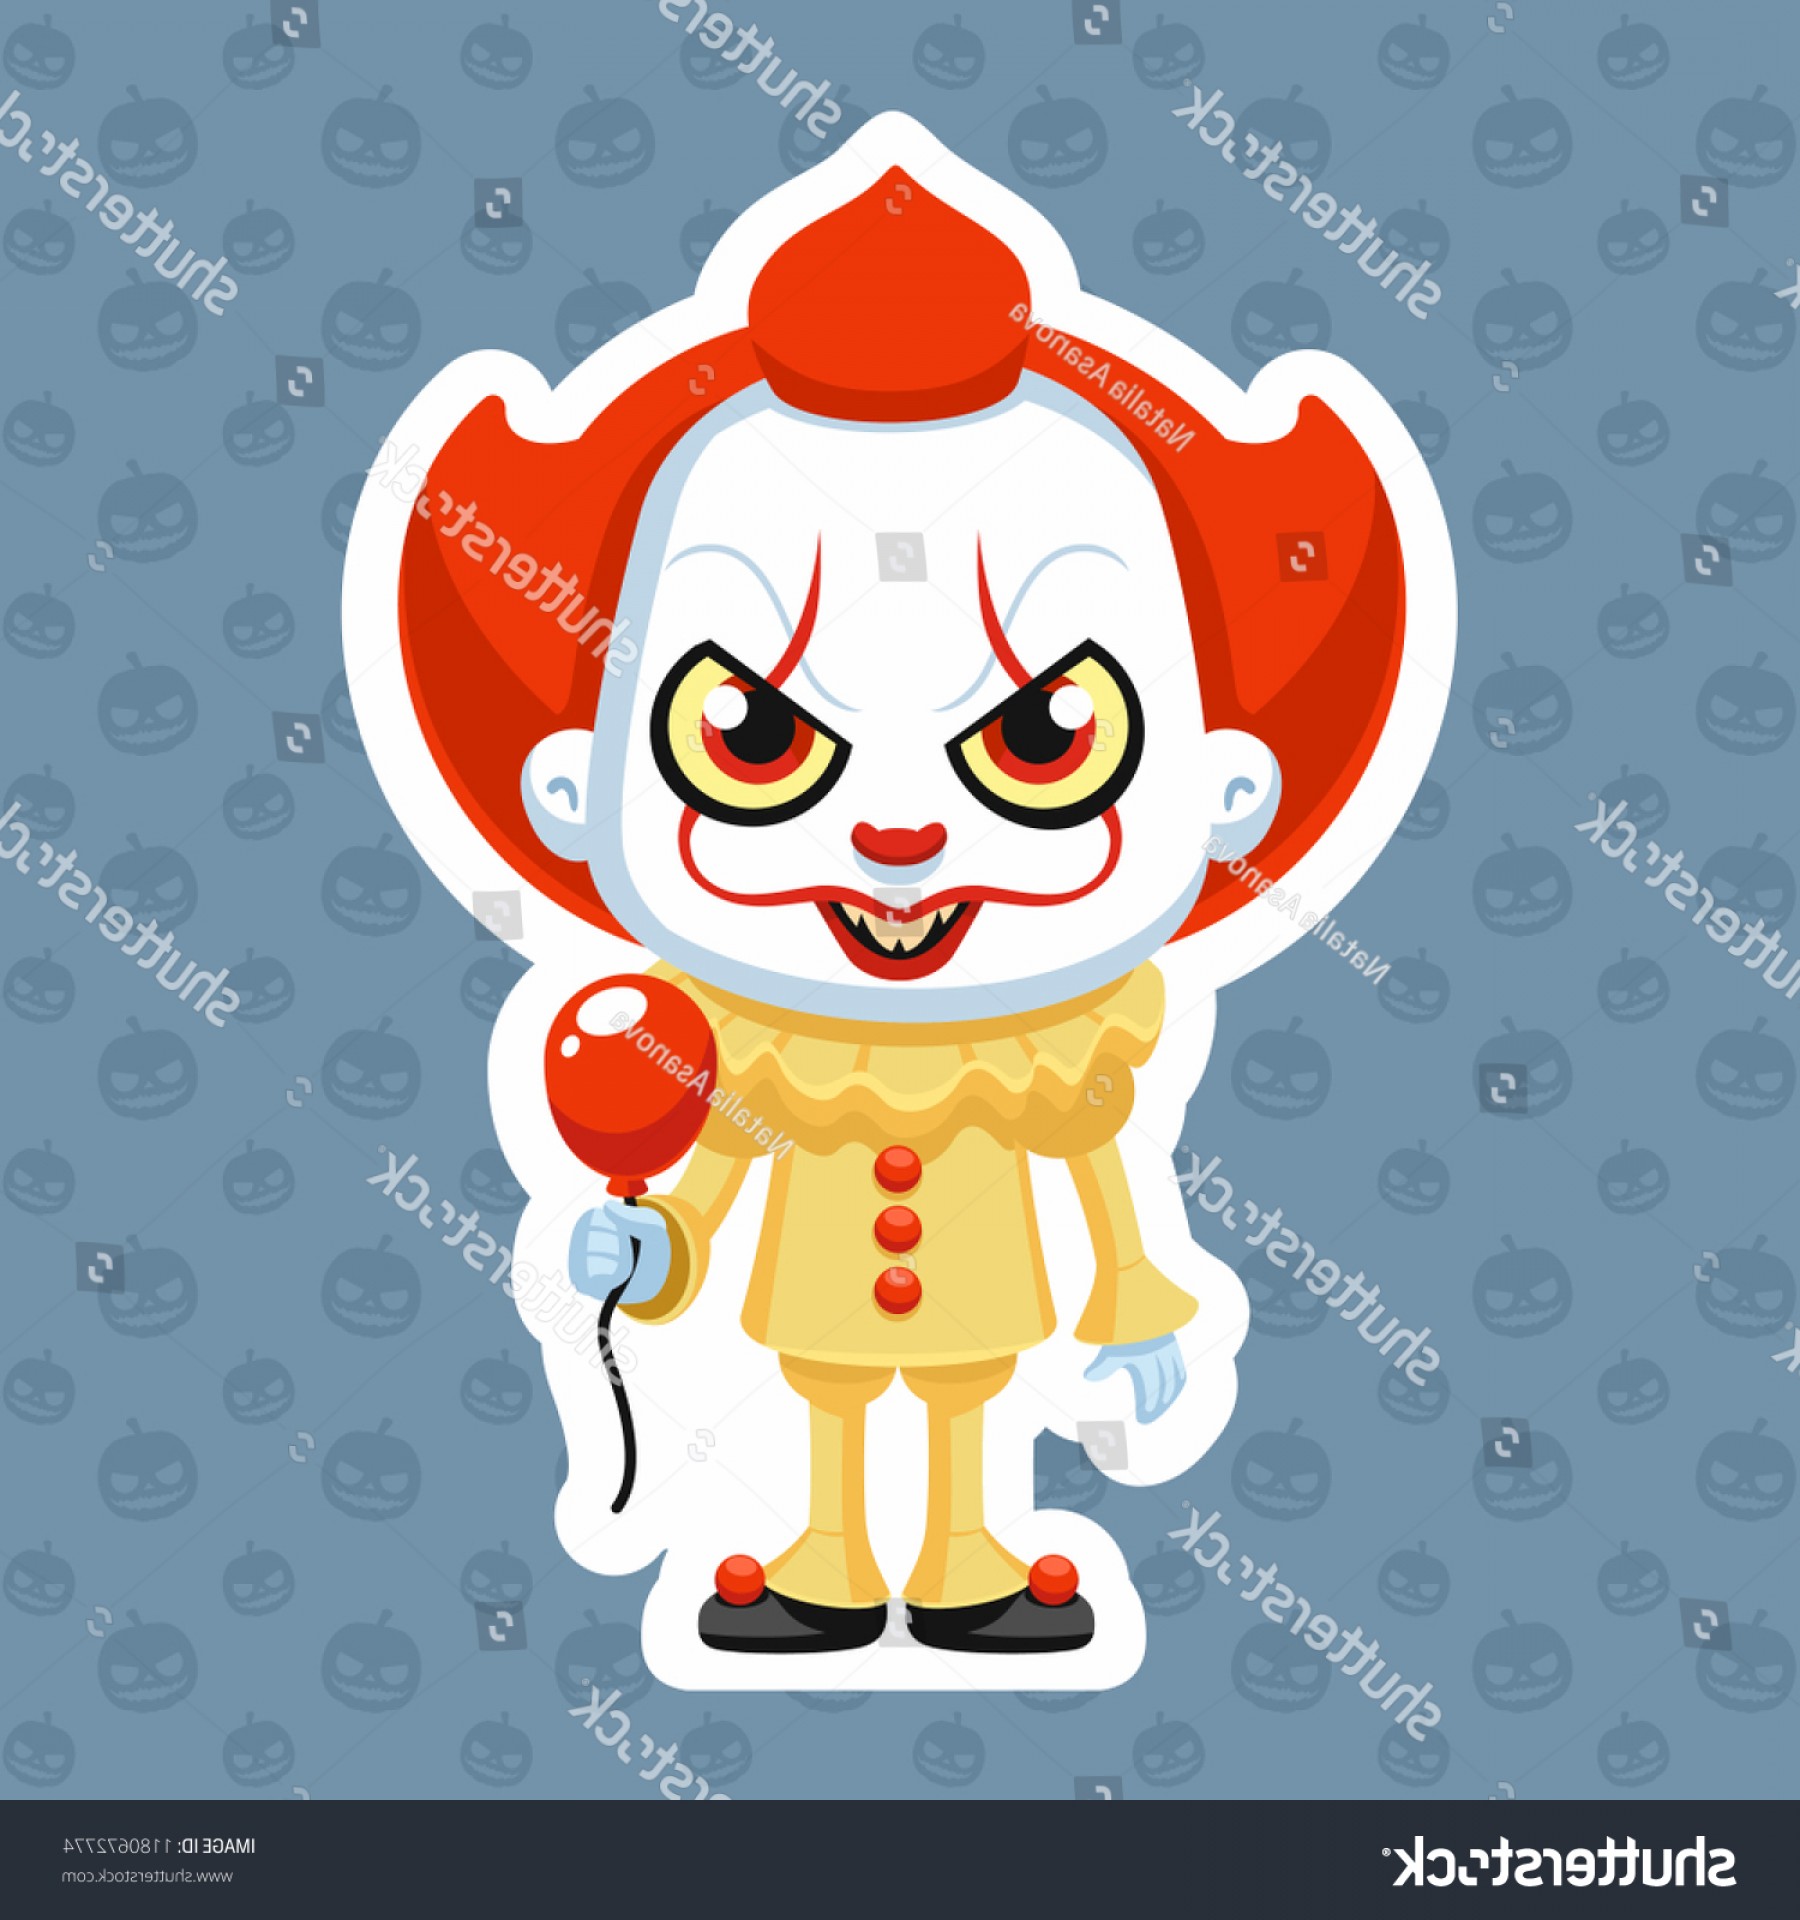 Pennywise vector illustration.